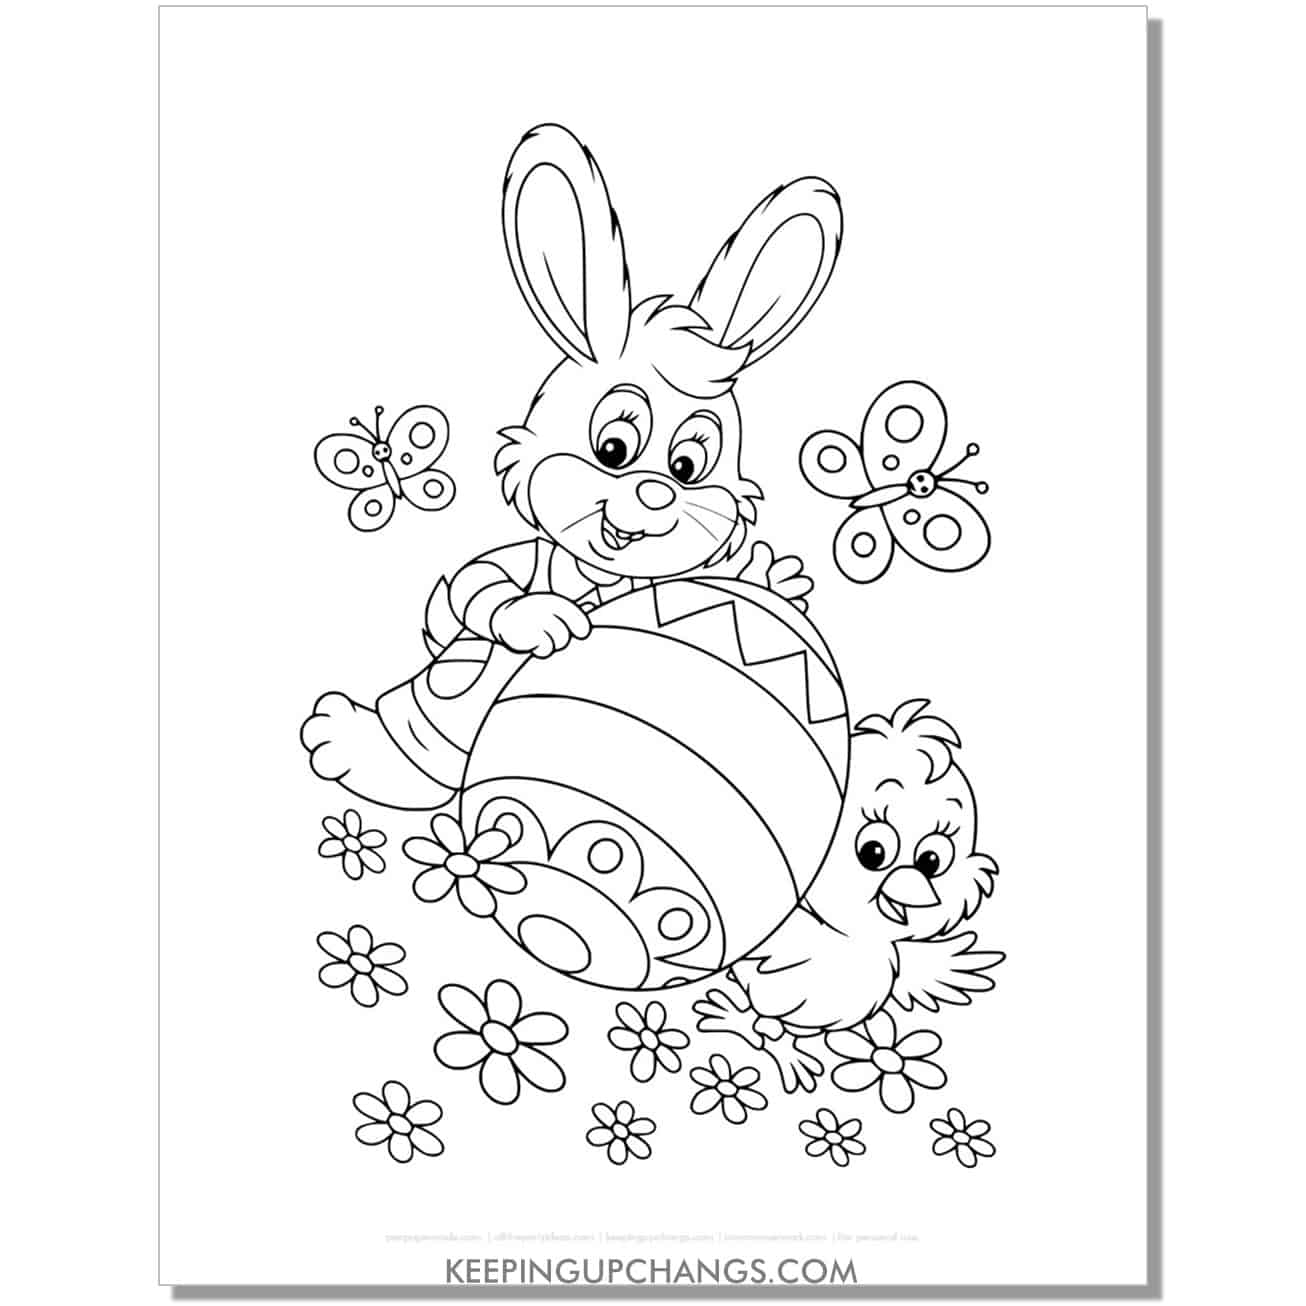 easter bunny, chick with egg coloring page, sheet.